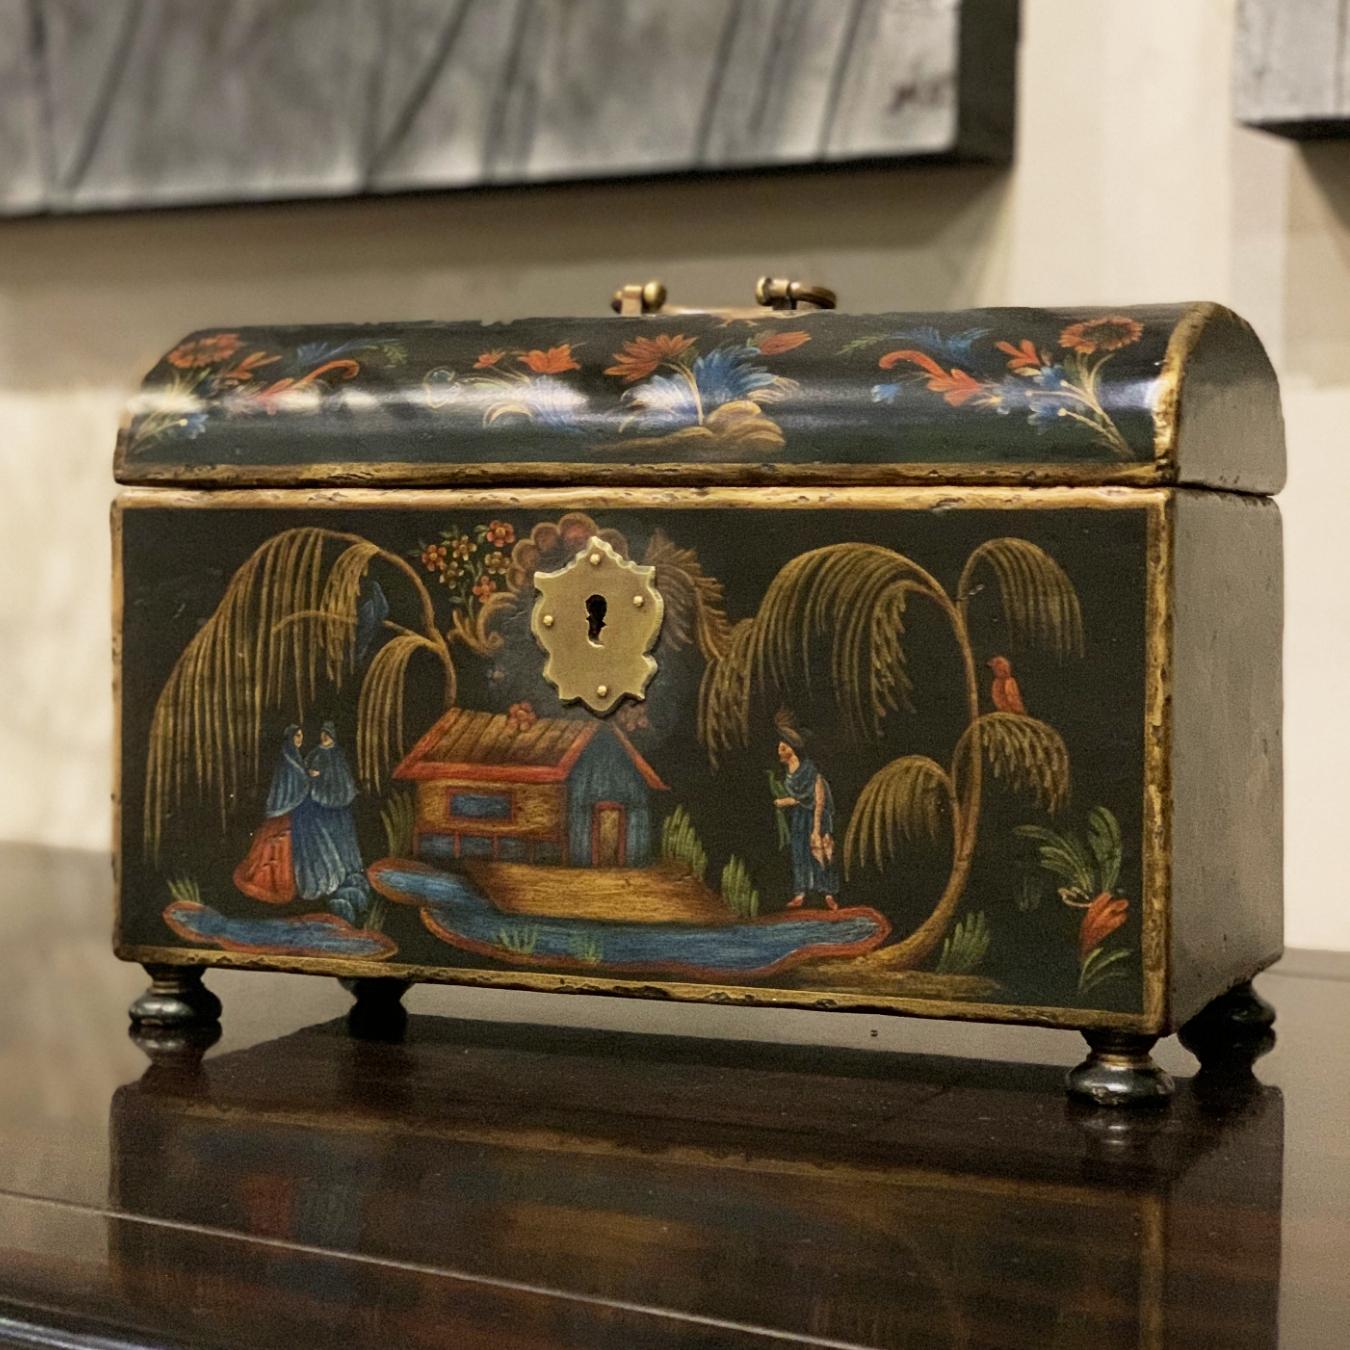 Our stunning Manila small coffer has colorful and intricate hand-painted scenes the immediately grab your attention. It is inspired by similar pieces from the XVIIIth Century, especially by the Michoacan tradition of lacquered furniture. It has